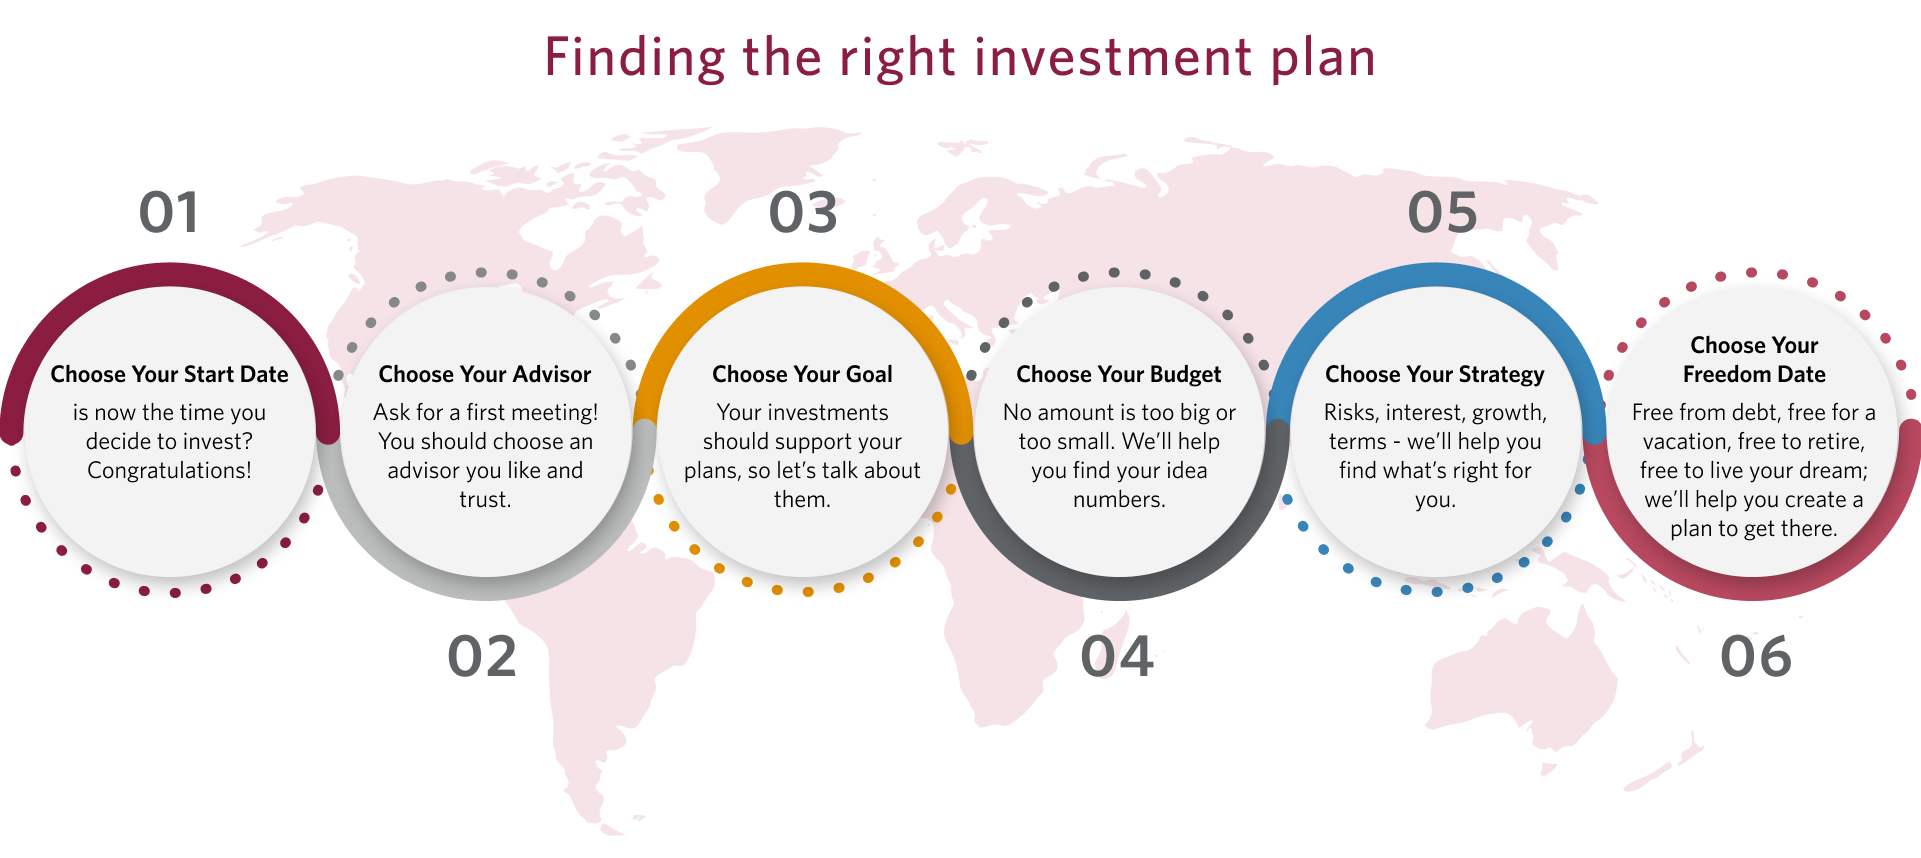 Finding the right investment approach flow chart